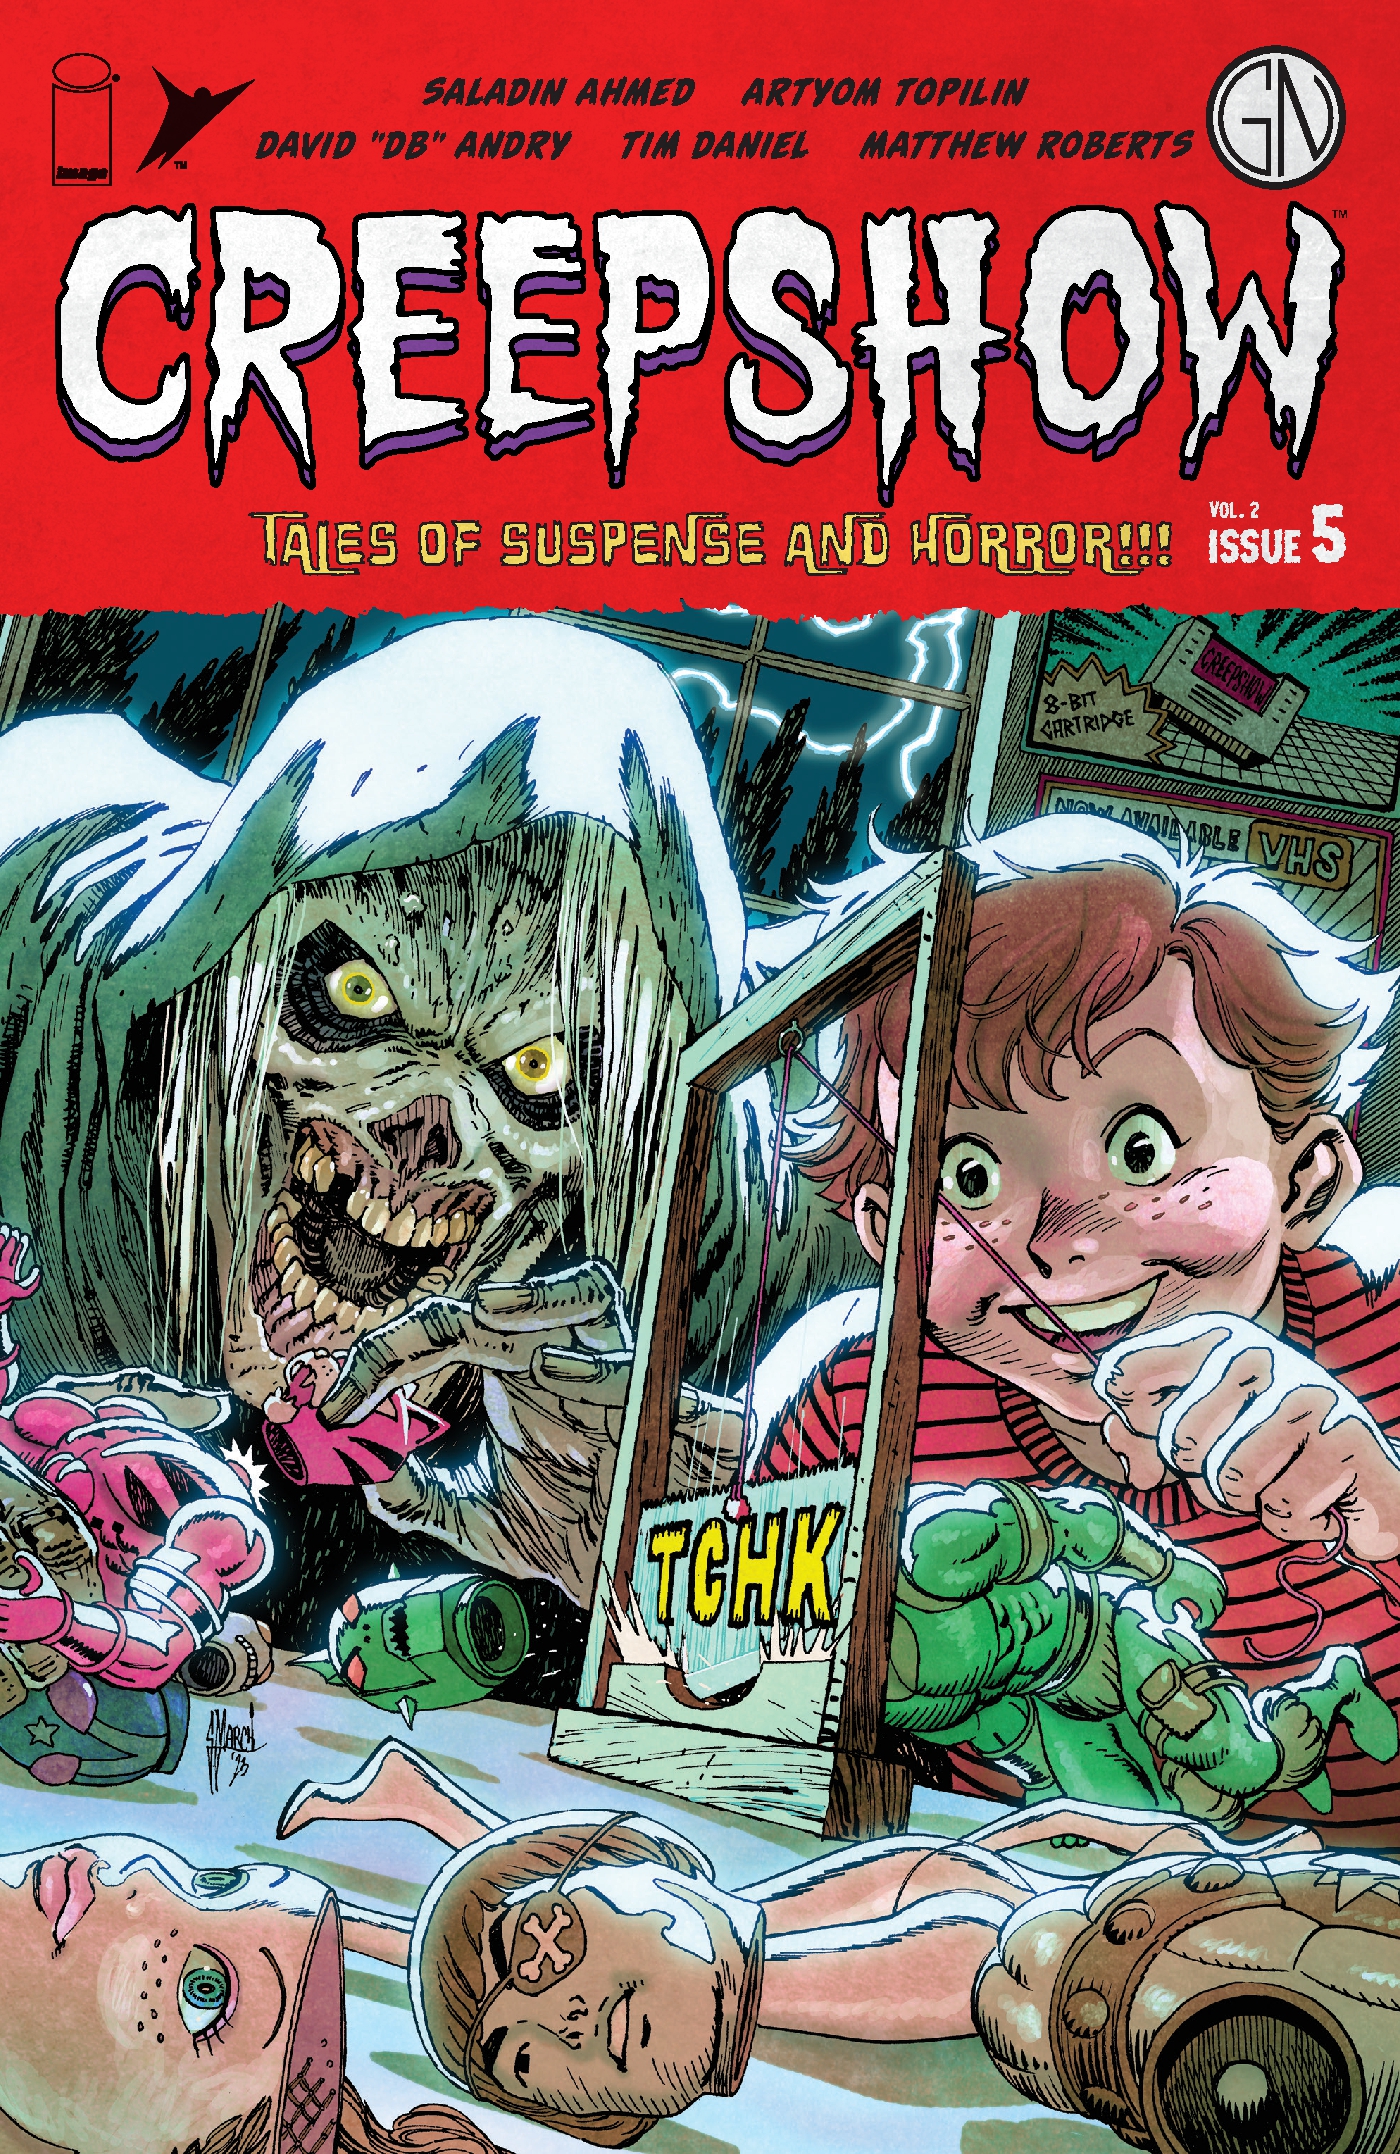 This image is the cover for the book Creepshow Vol. 2 #5, Creepshow